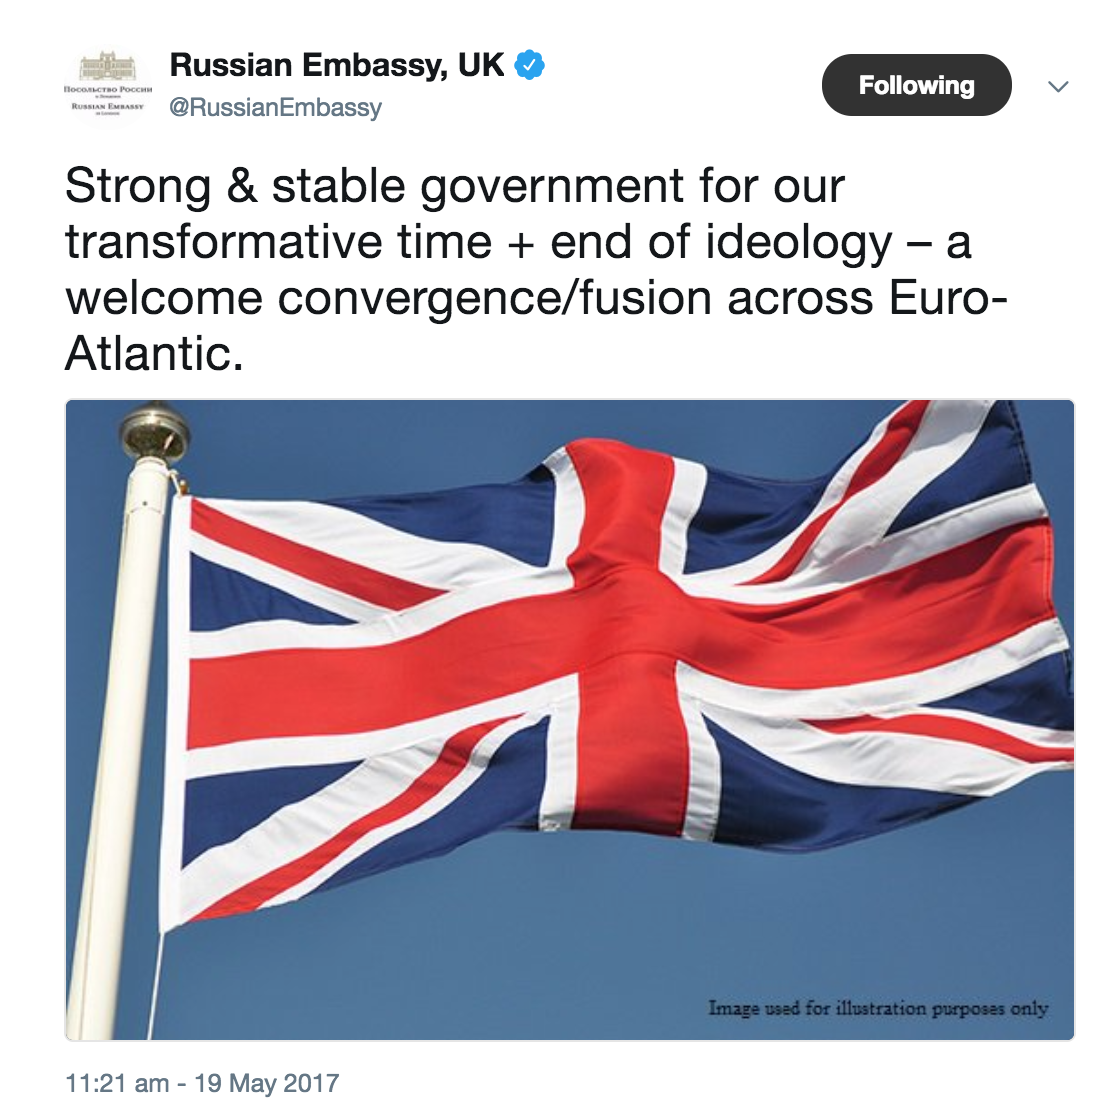 Russia Officially Supported Theresa May's Conservatives in the 2017 General Election.